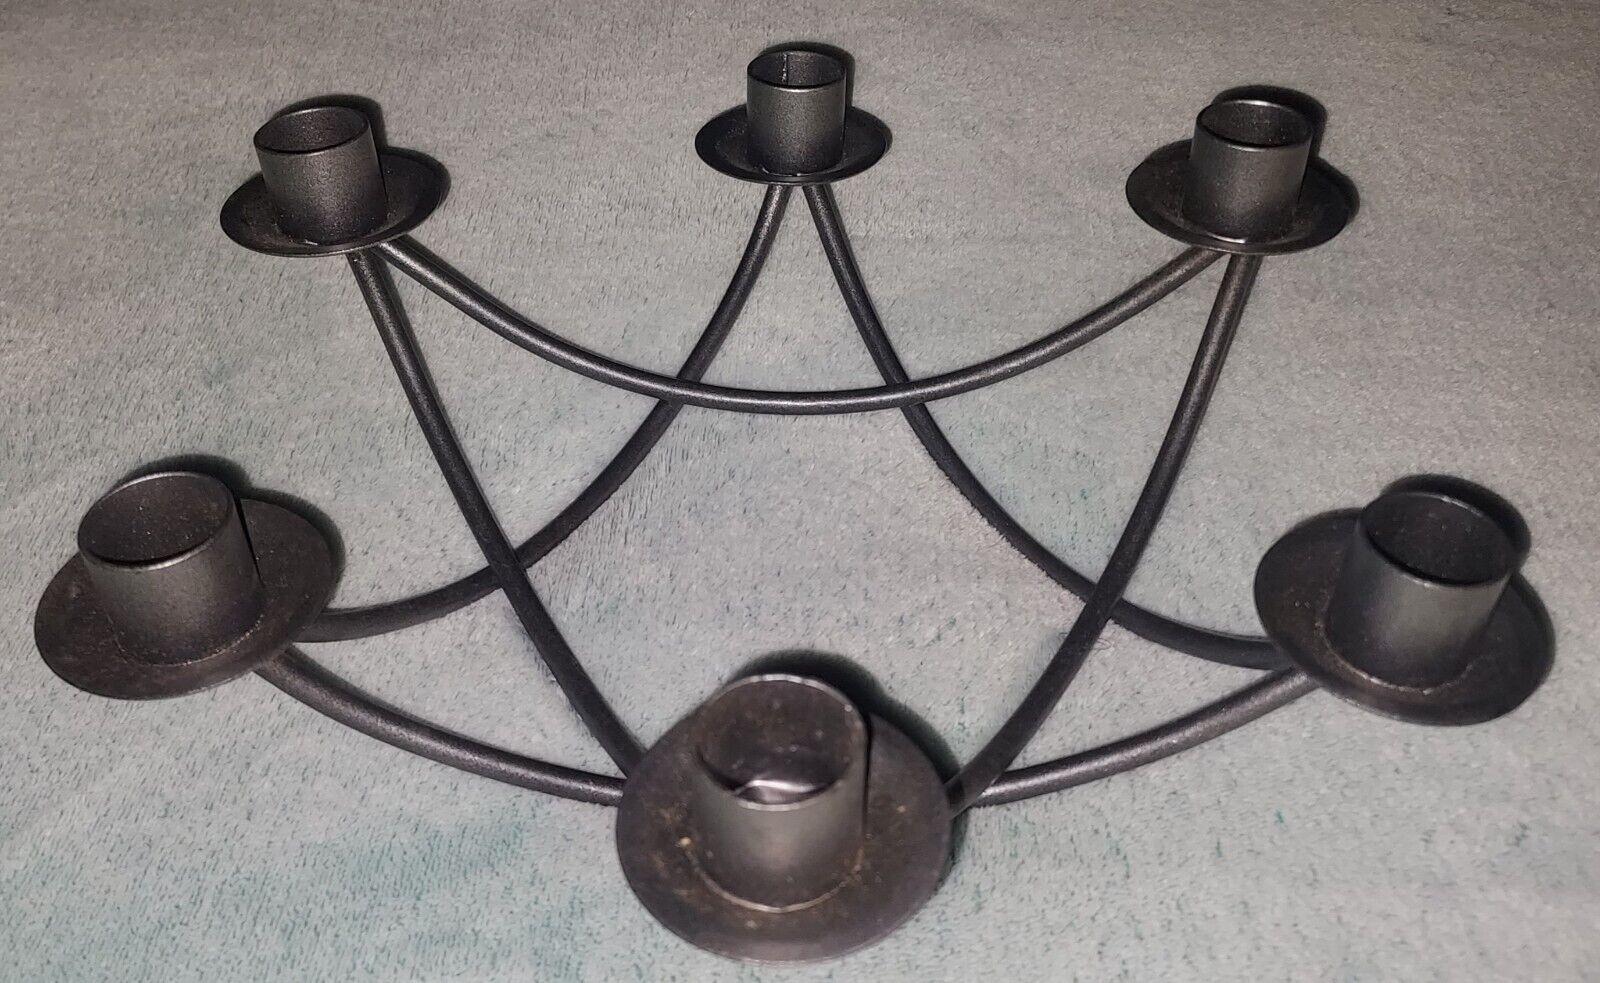 2 Separate Triangle Candlestick Holders Form Jewish Star Together 6 Candlesticks